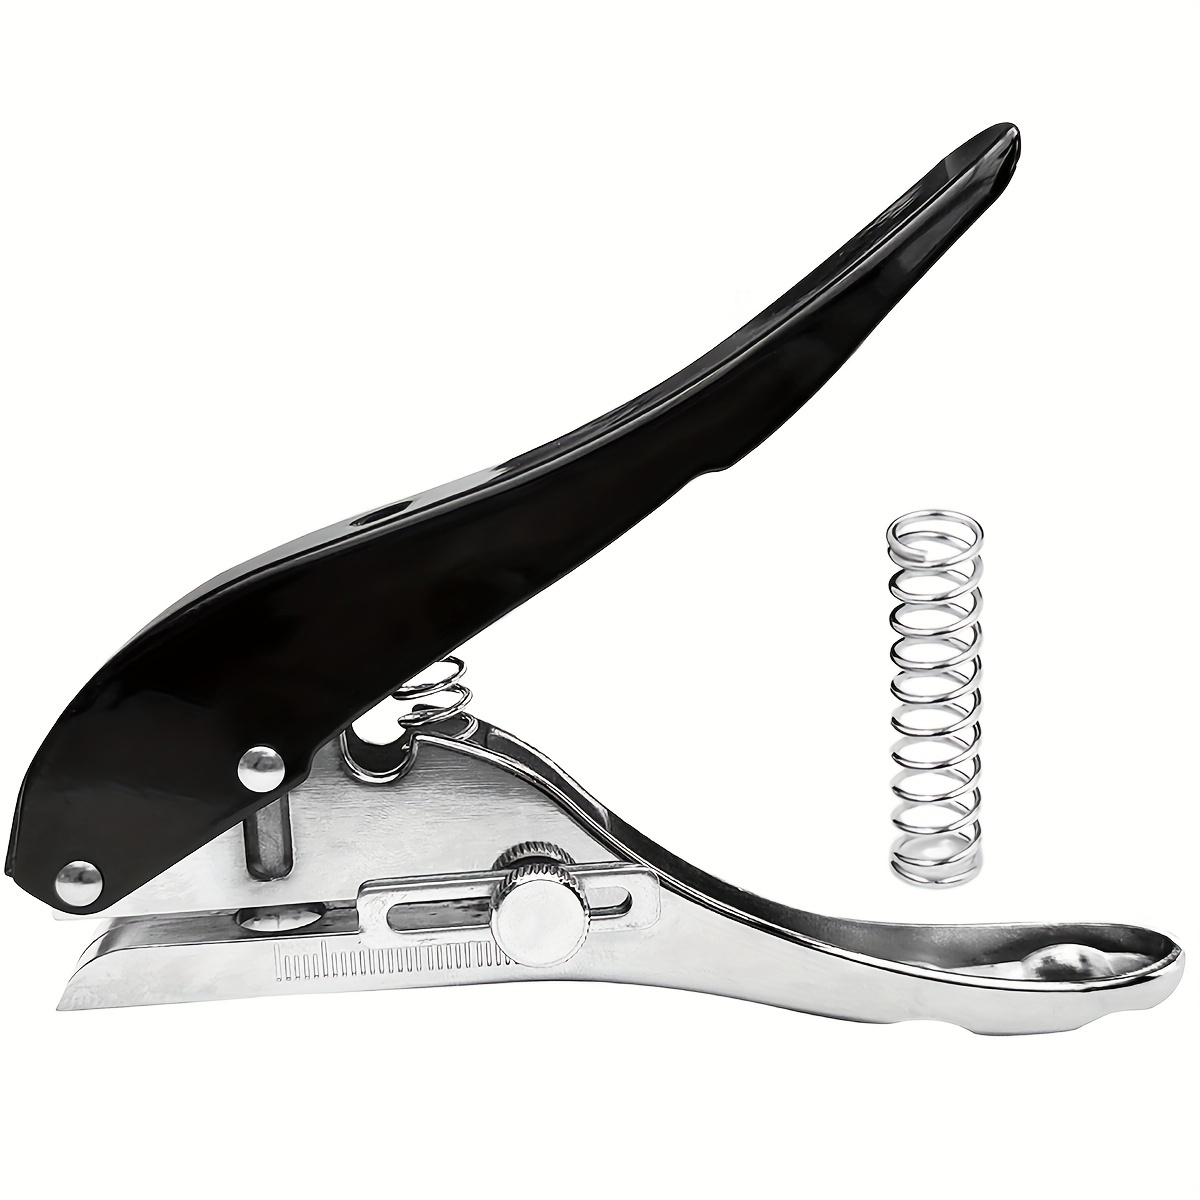 Metal 6 Hole Punch Portable Handheld Hole Puncher Daily - Temu